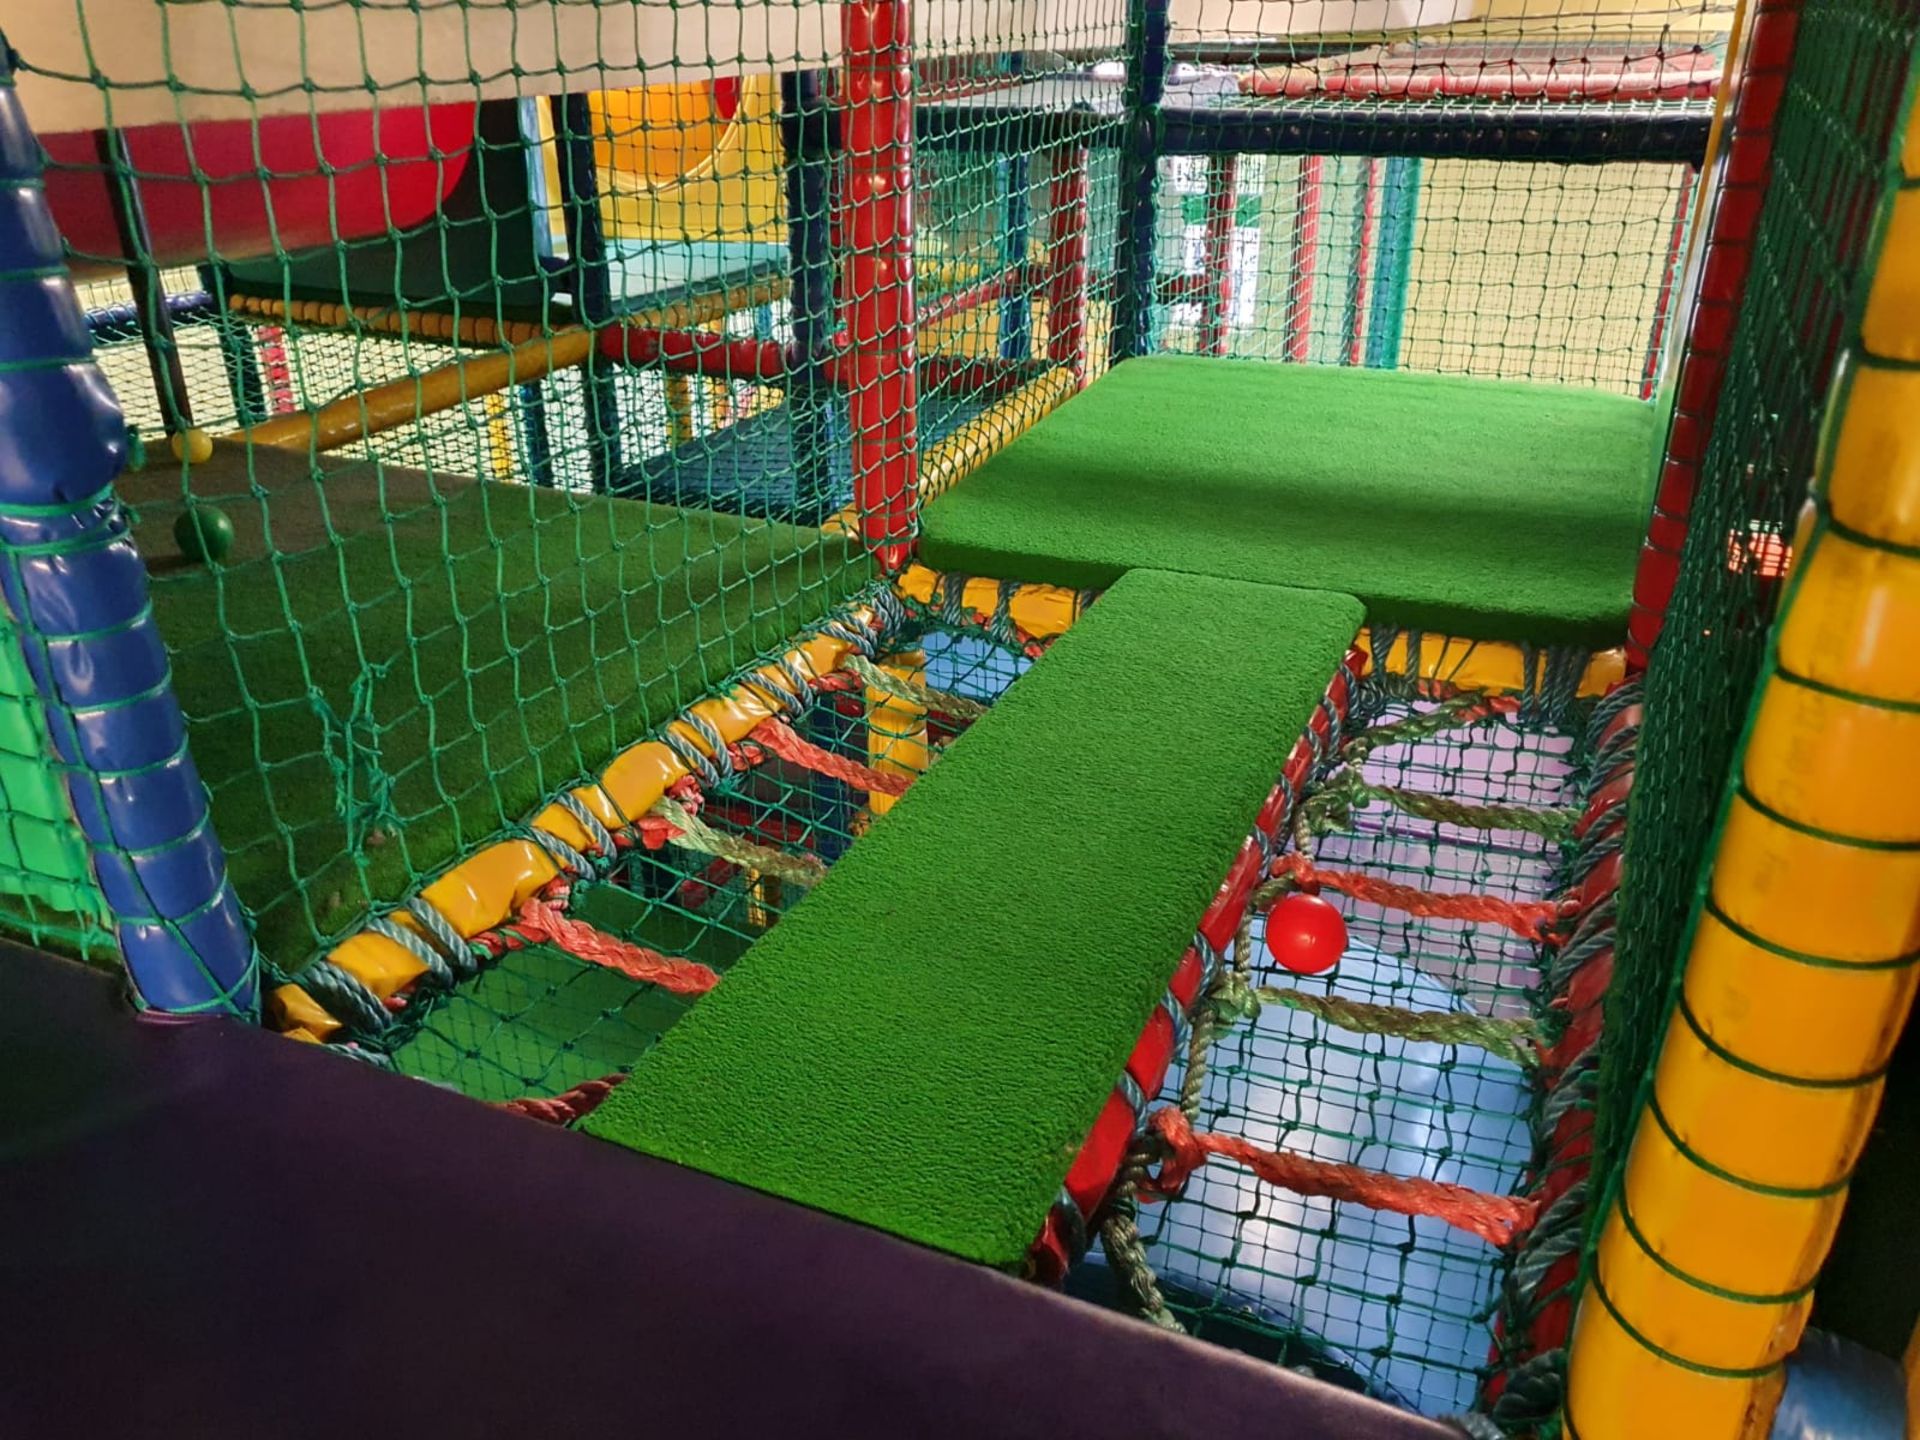 Bramleys Big Adventure Playground - Giant Action-Packed Playcentre With Slides, Zip Line Swings, - Image 102 of 128